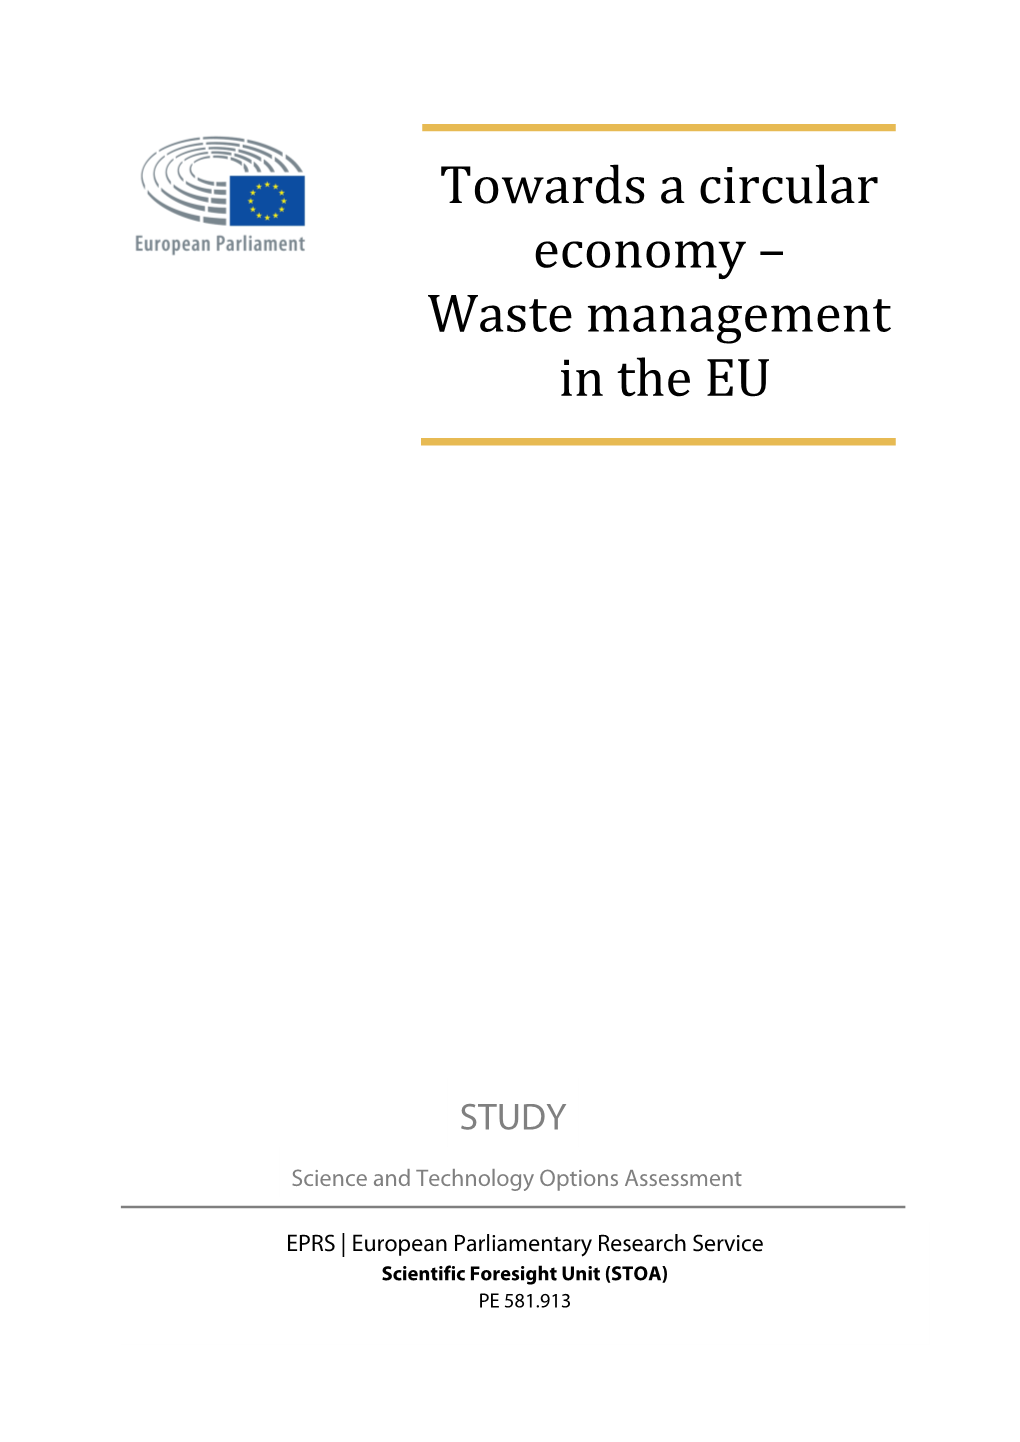 Towards a Circular Economy – Waste Management in the EU